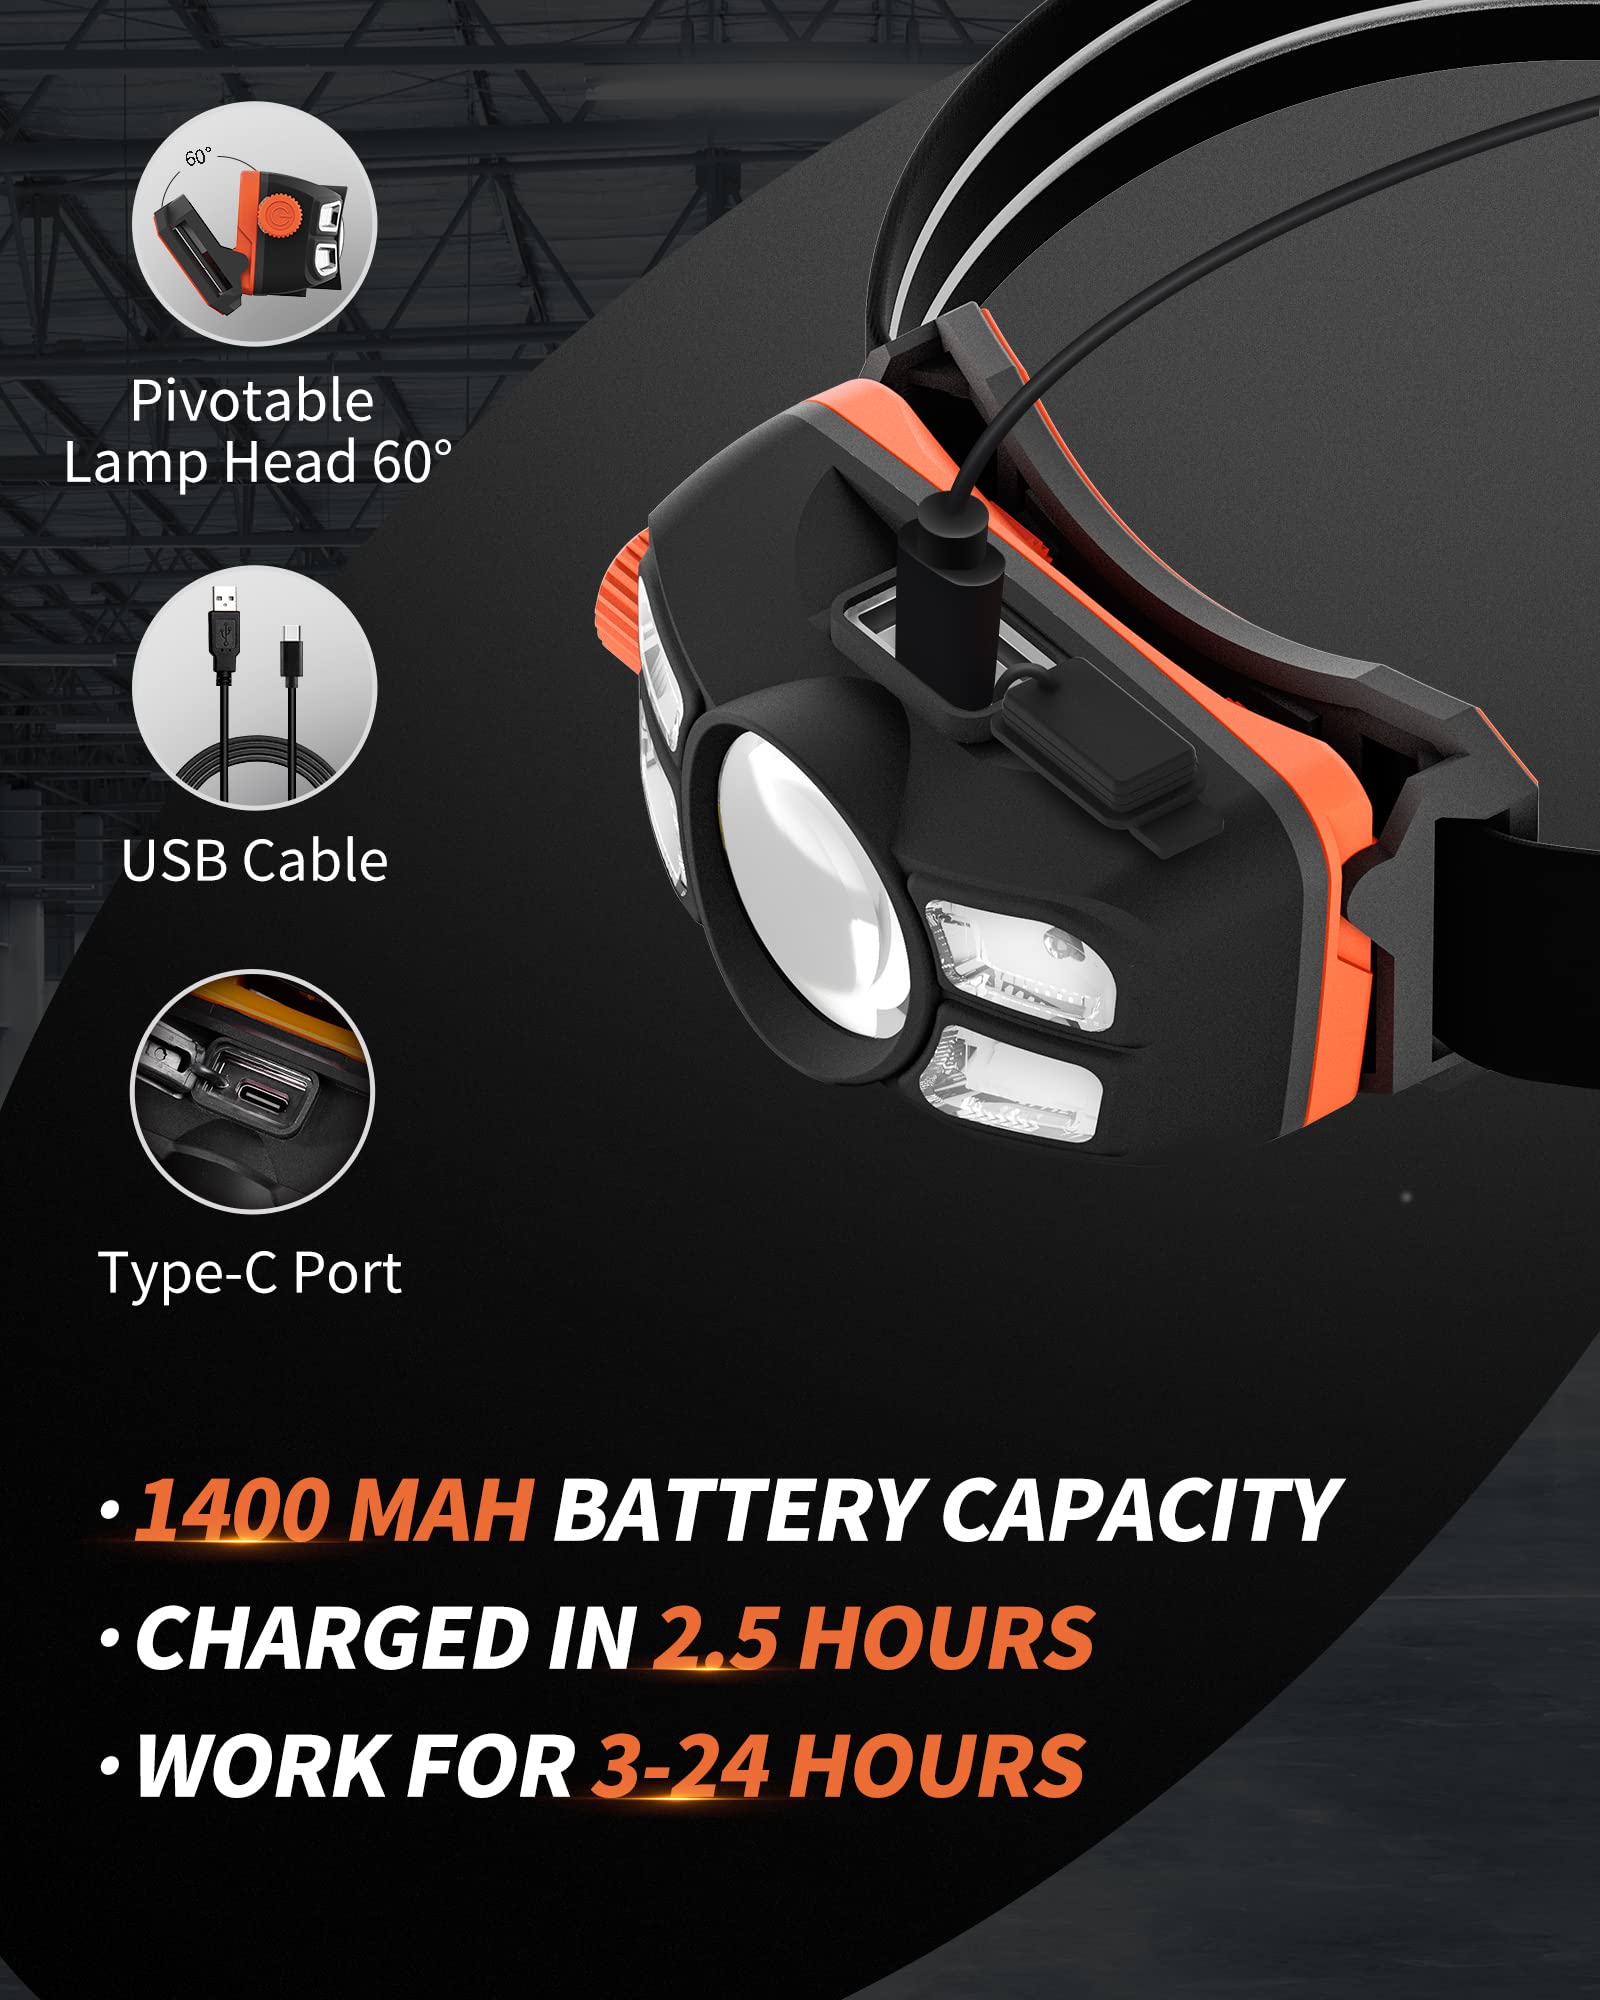 Anylight Rechargeable LED Headlamp with Stepless Dimming and Motion Sensor, IP65 Waterproof Headlight for Repairing, Running, Camping, Hiking(2 Packs)